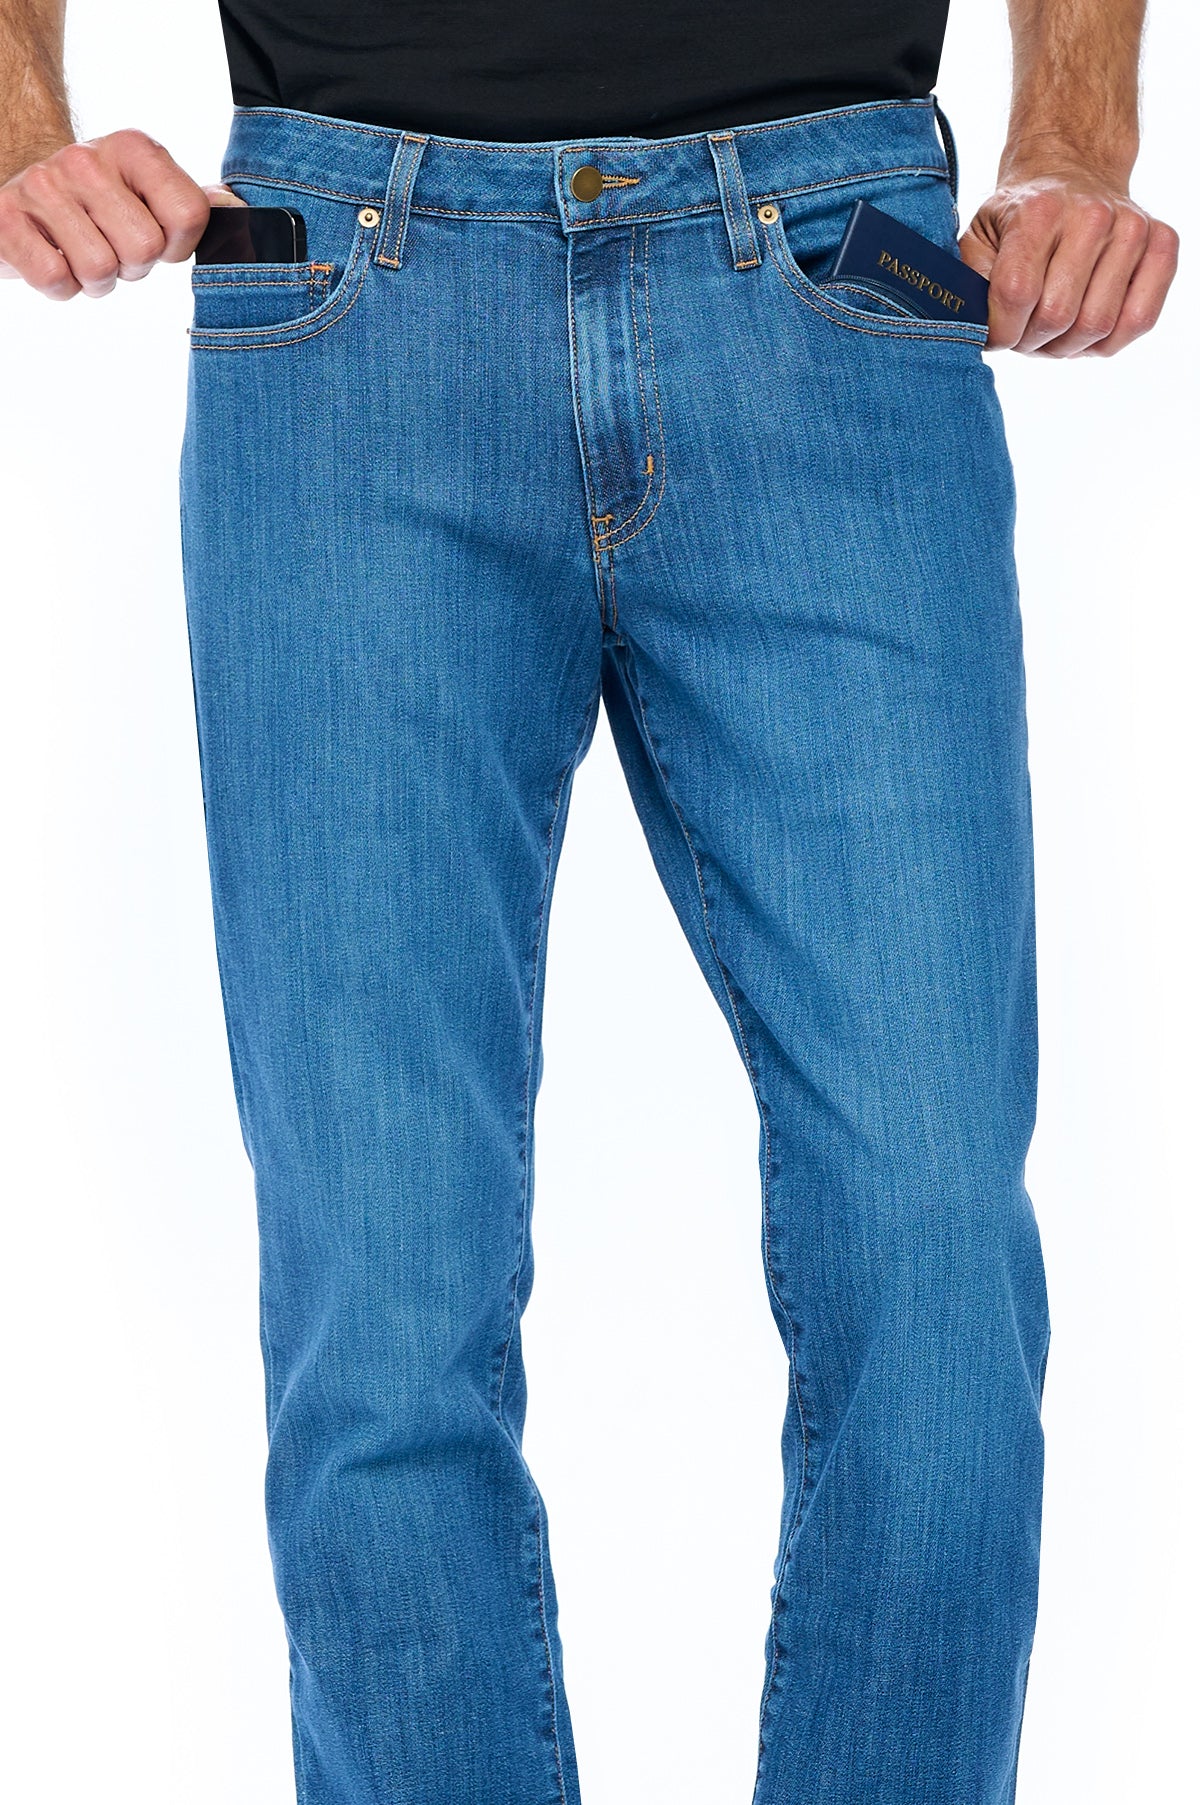 The Best Travel Jeans For Men Vintage Indigo Made In The, 49% OFF